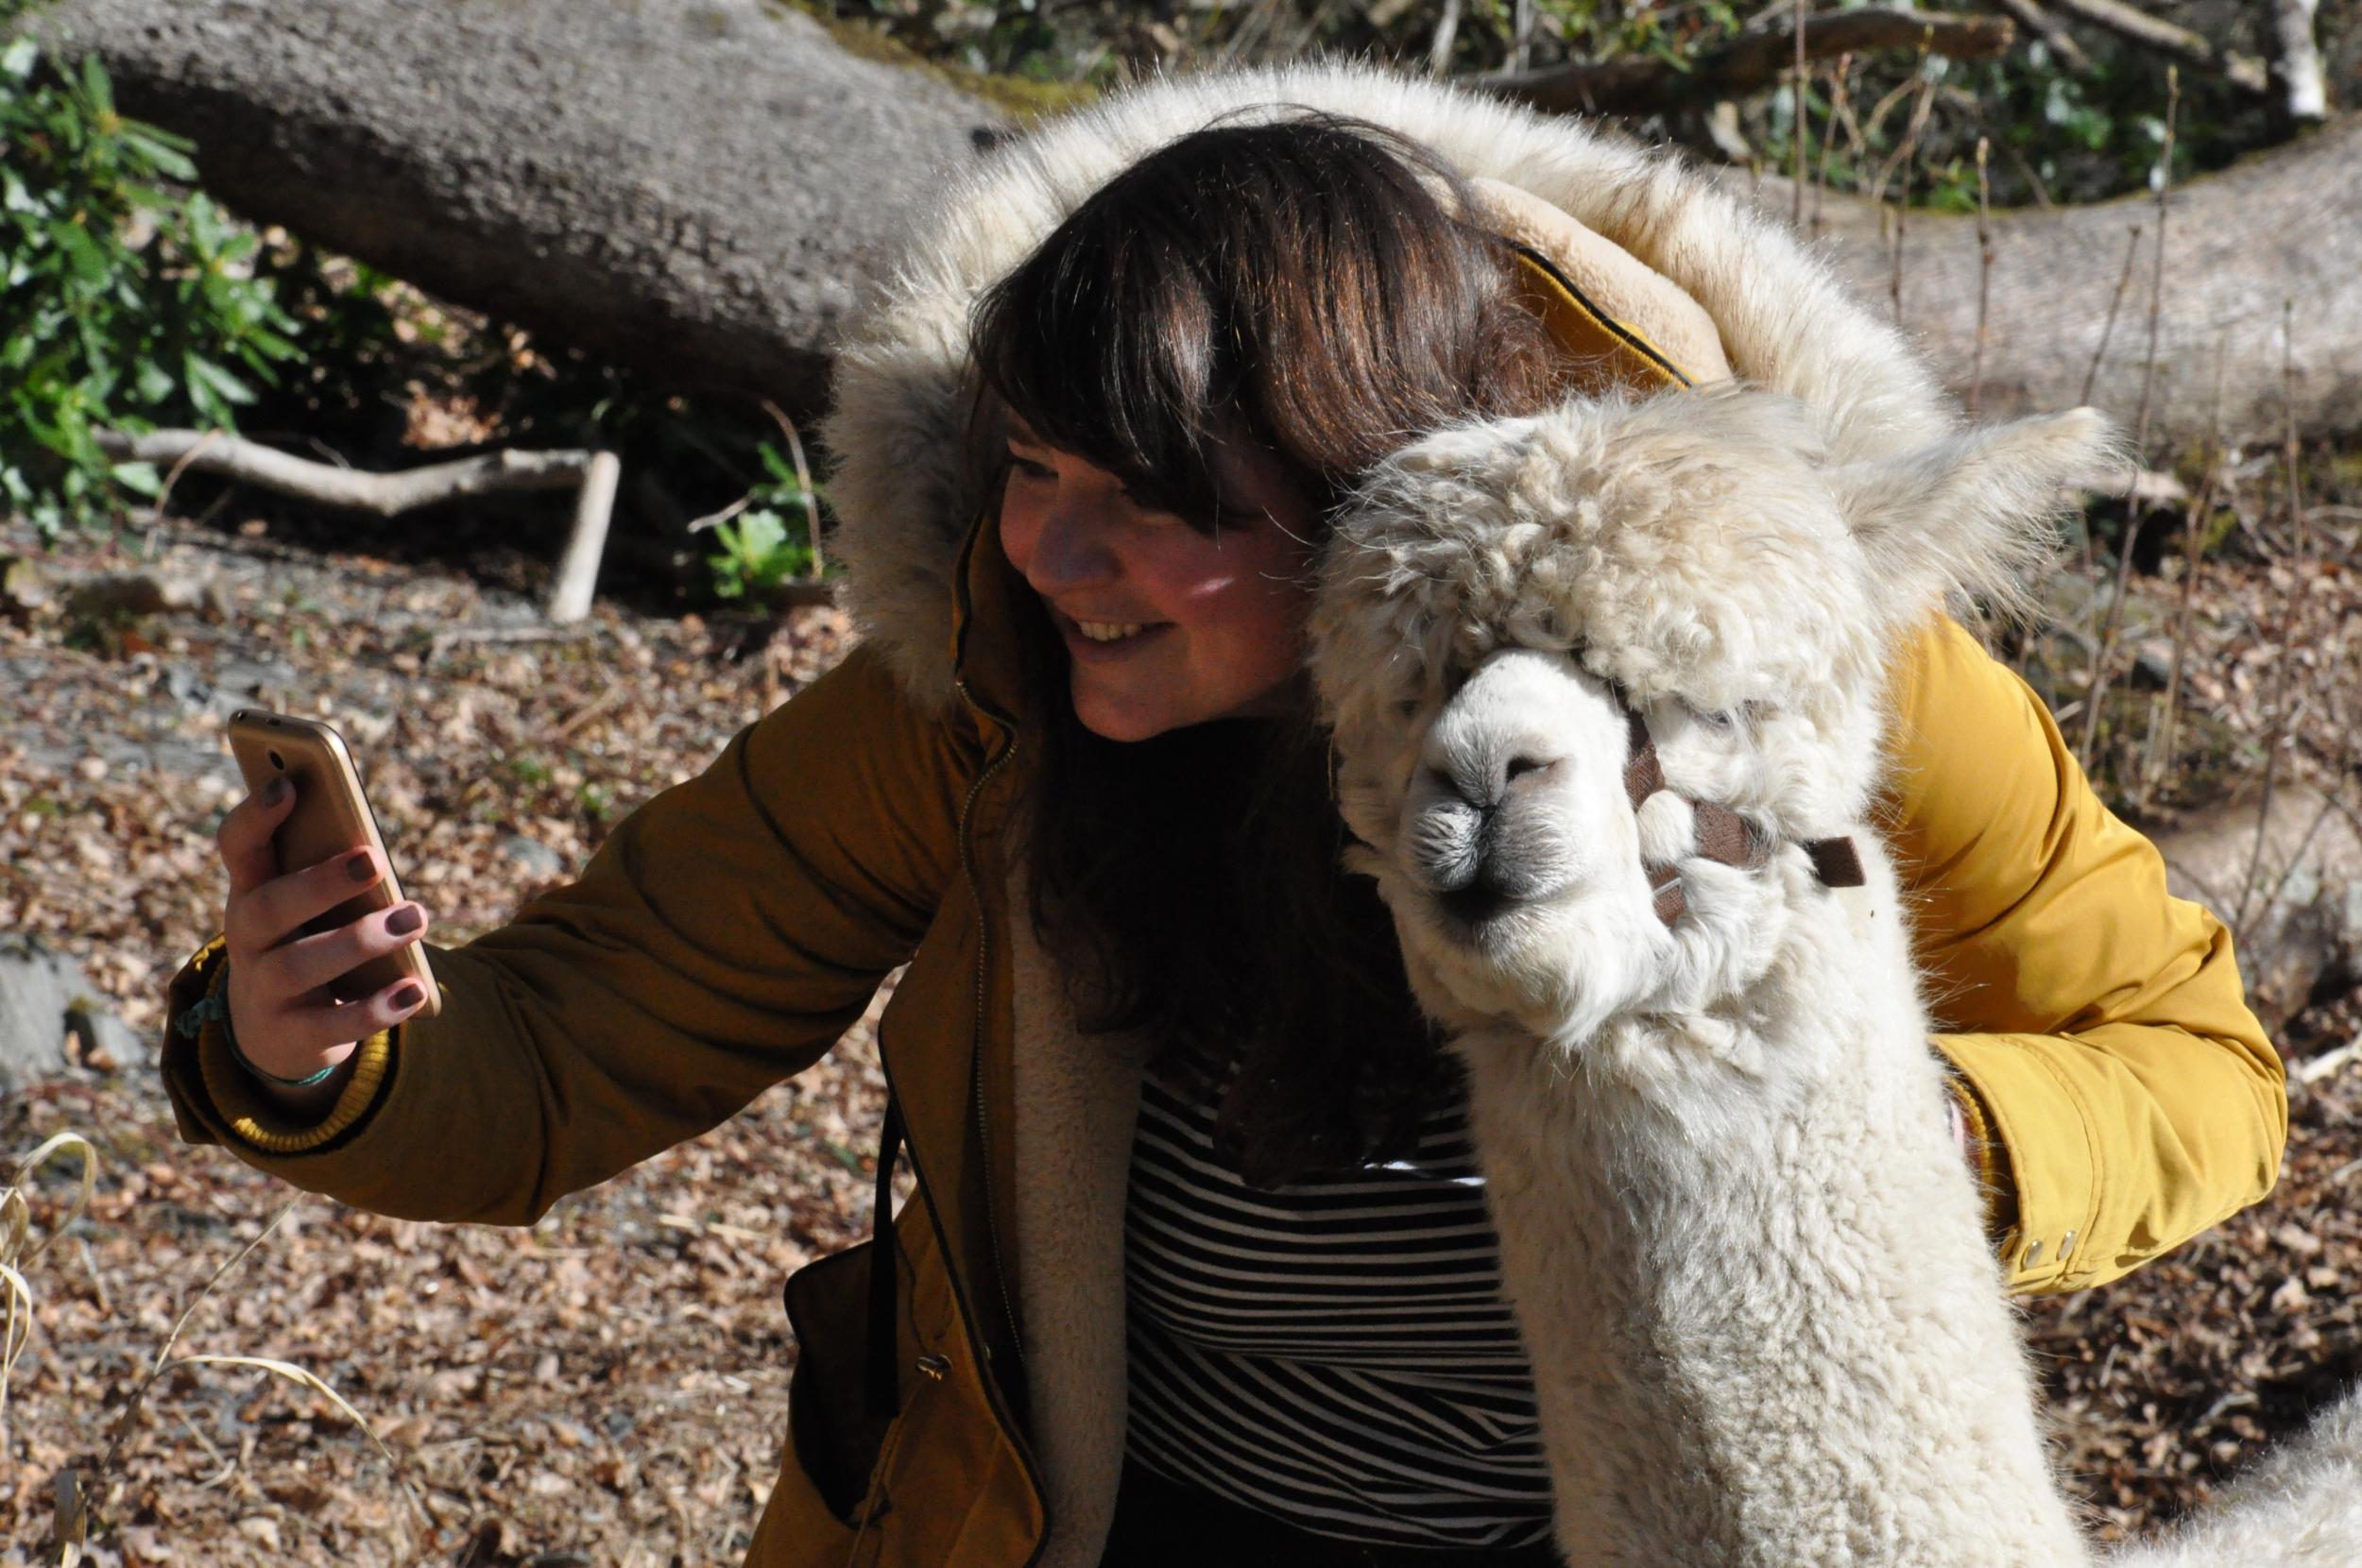 &#13;
Taking a selfie with an alpaca is harder than it looks &#13;